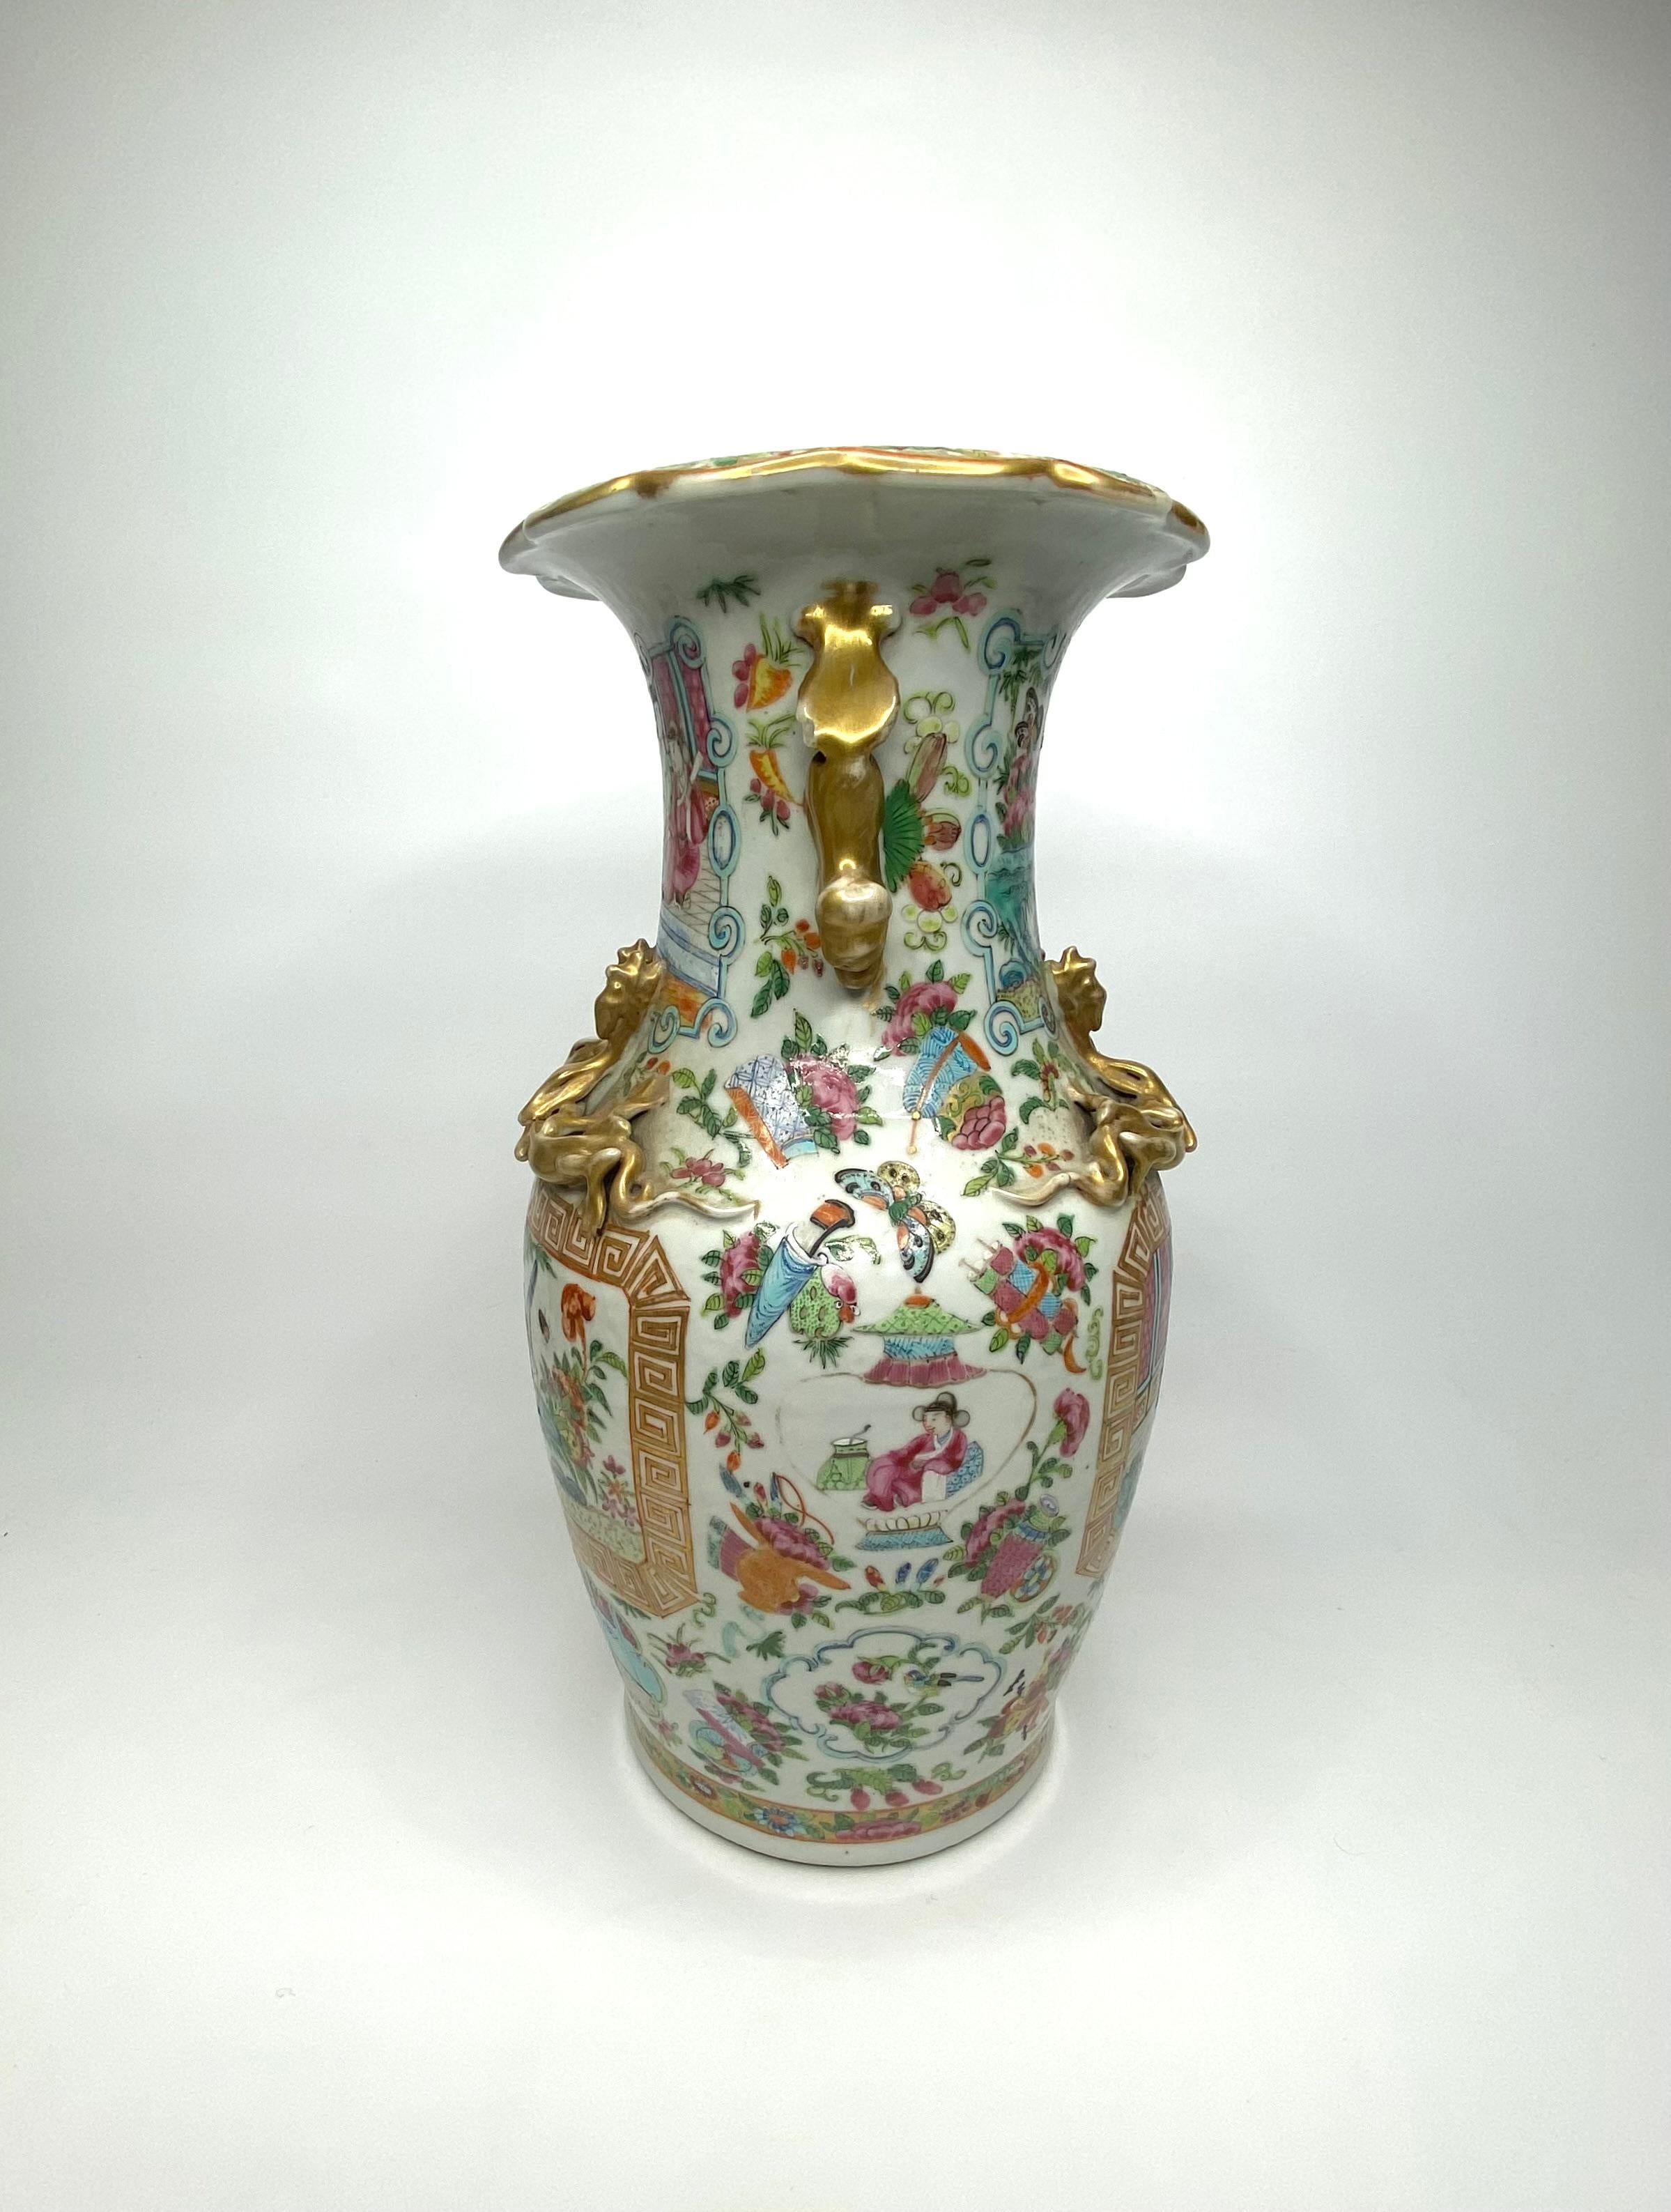 Chinese porcelain vase, c. 1870, Qing Dynasty. Well painted in the Cantonese style, with a twin panels of figures in a garden setting, and the reverse with exotic birds and insects amongst rocks, in a garden; the sides, with vase shaped panels of